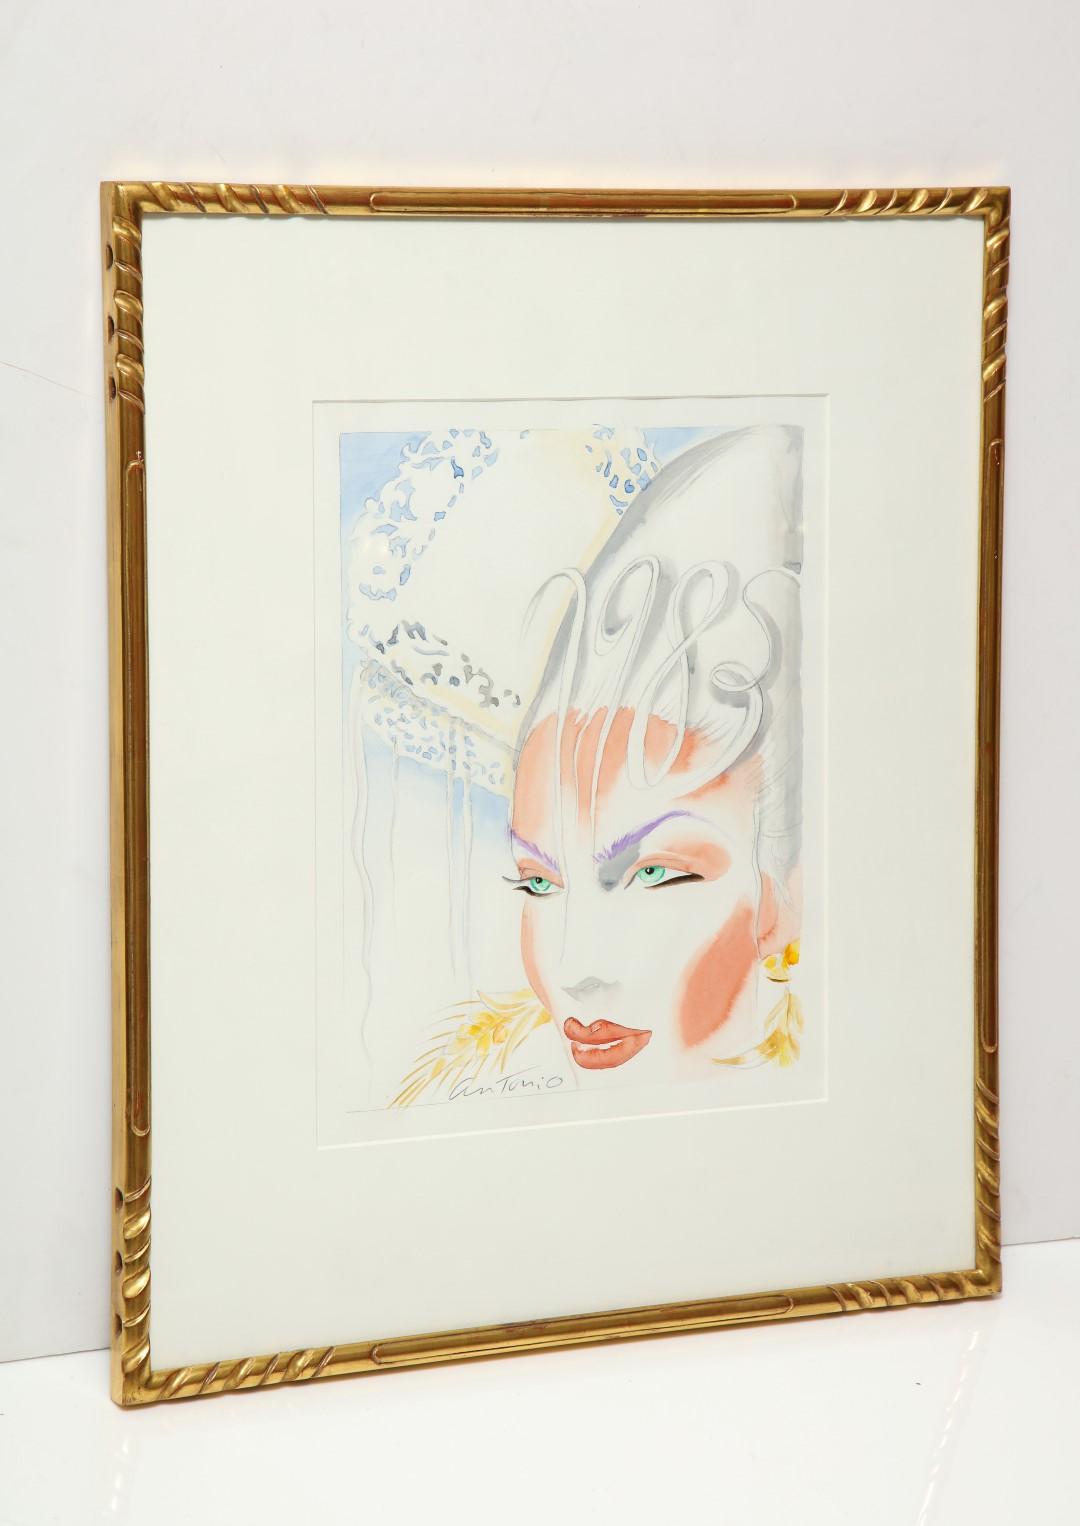 A framed gouache on paper showcasing model Jerry Hall, by Antonio Lopez. The work is the original artwork for Anna Piaggi's Italian fashion magazine 